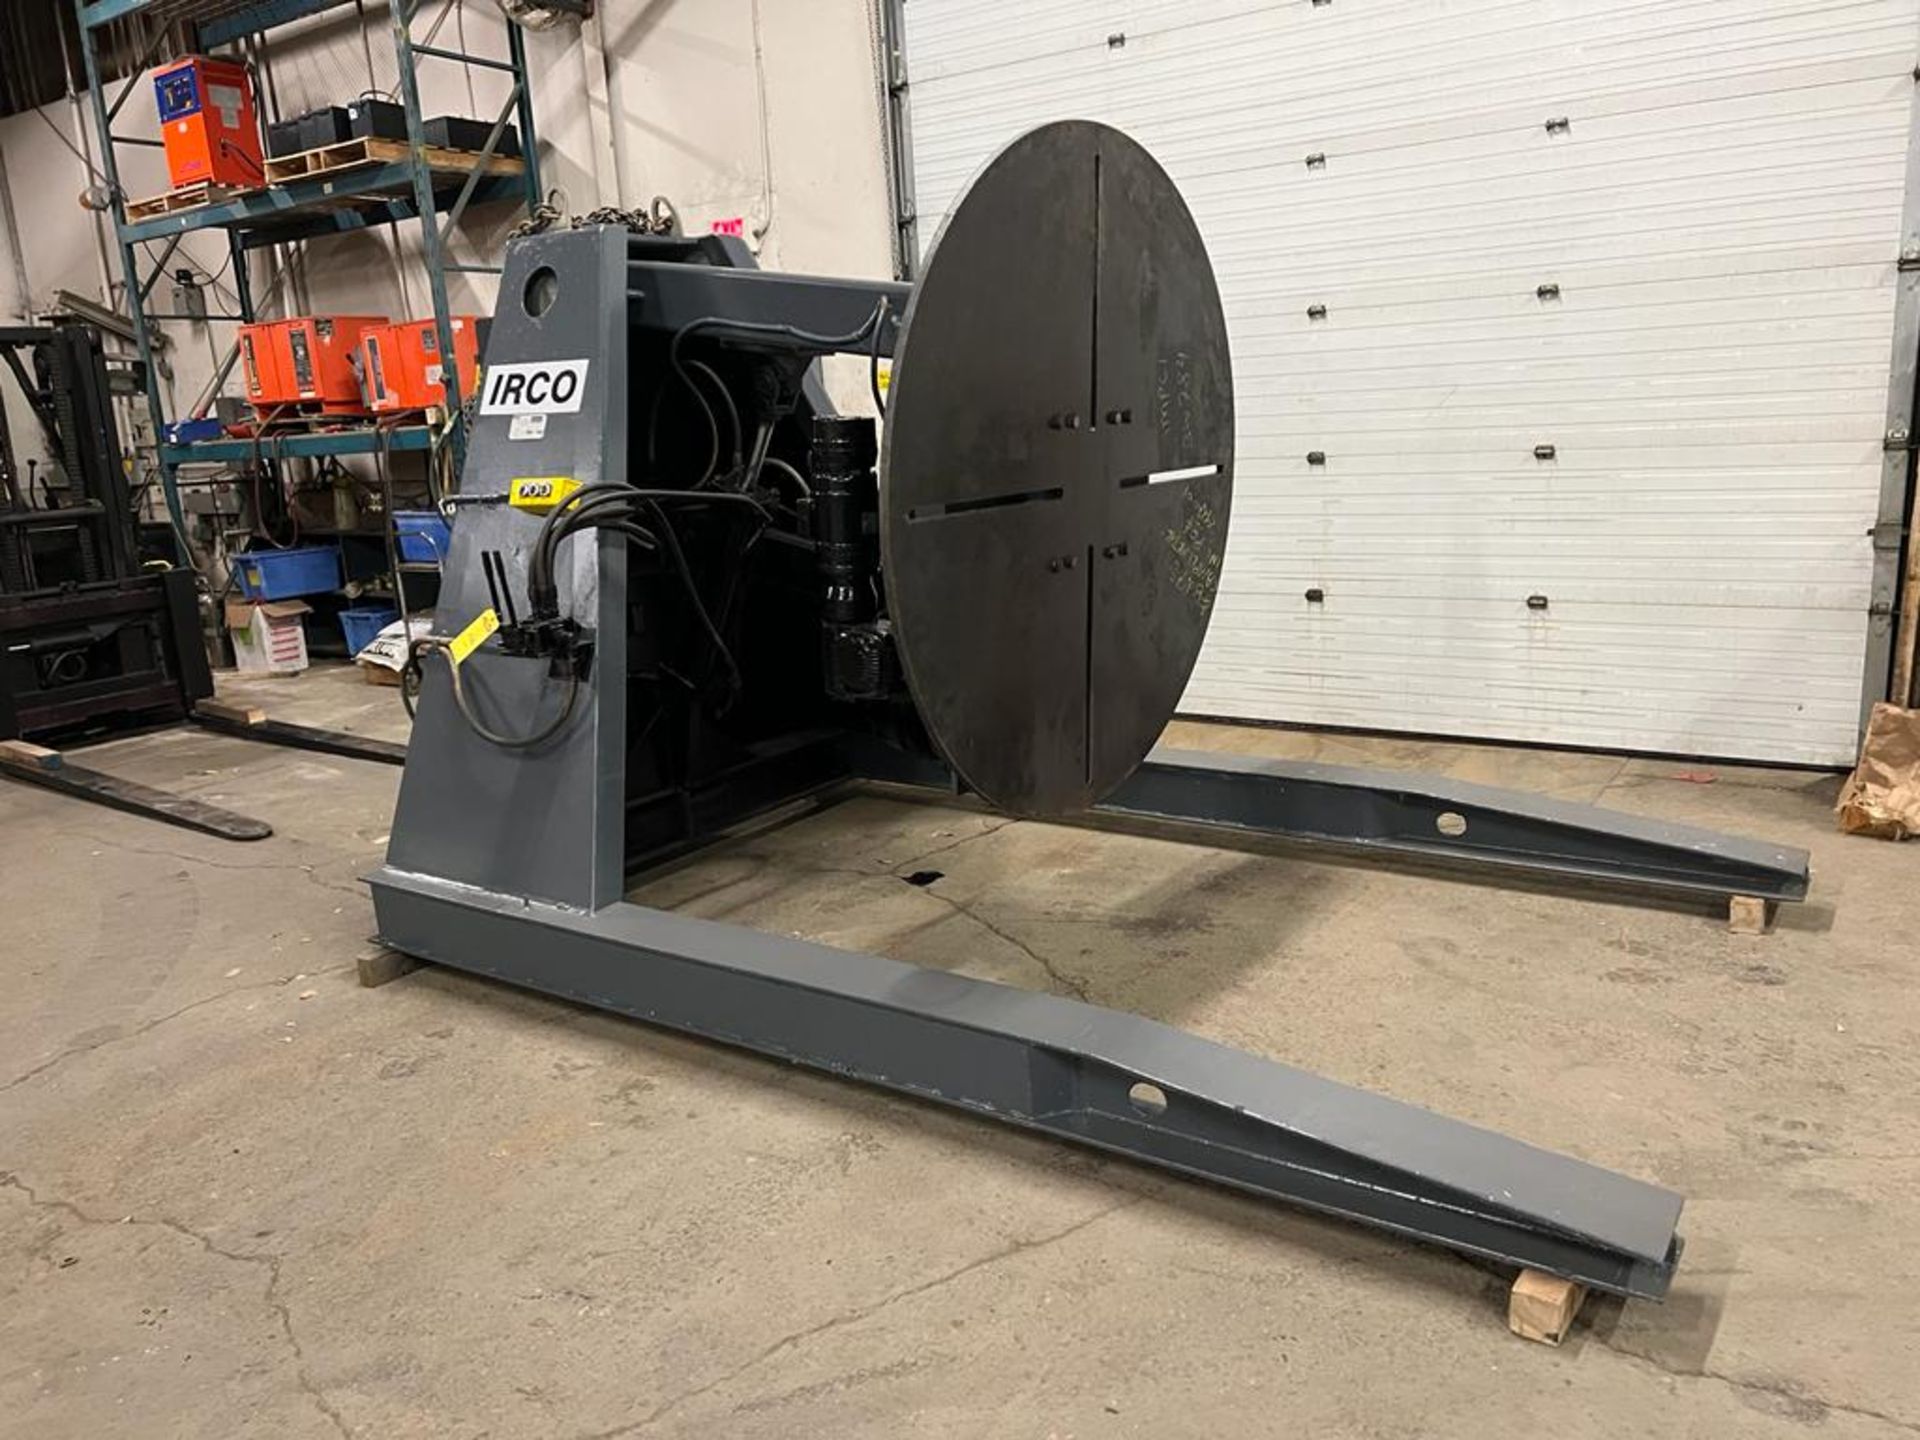 IRCO 16,000lbs Capacity Welding Positioner TILT and ROTATE model 6-16 with pendant controller